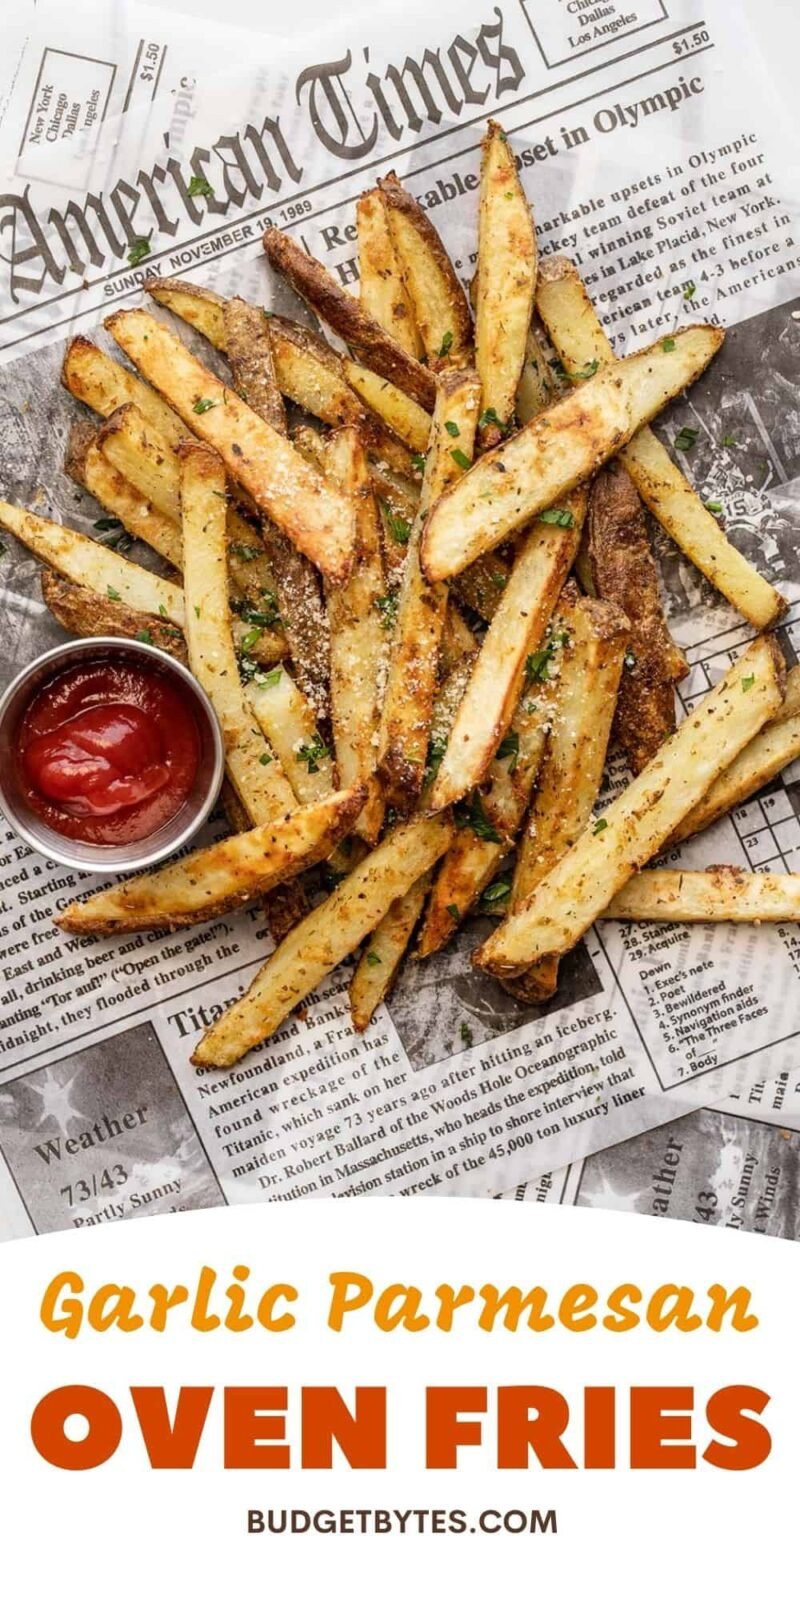 Garlic Parmesan Fries in a pile on newsprint with a dish of ketchup